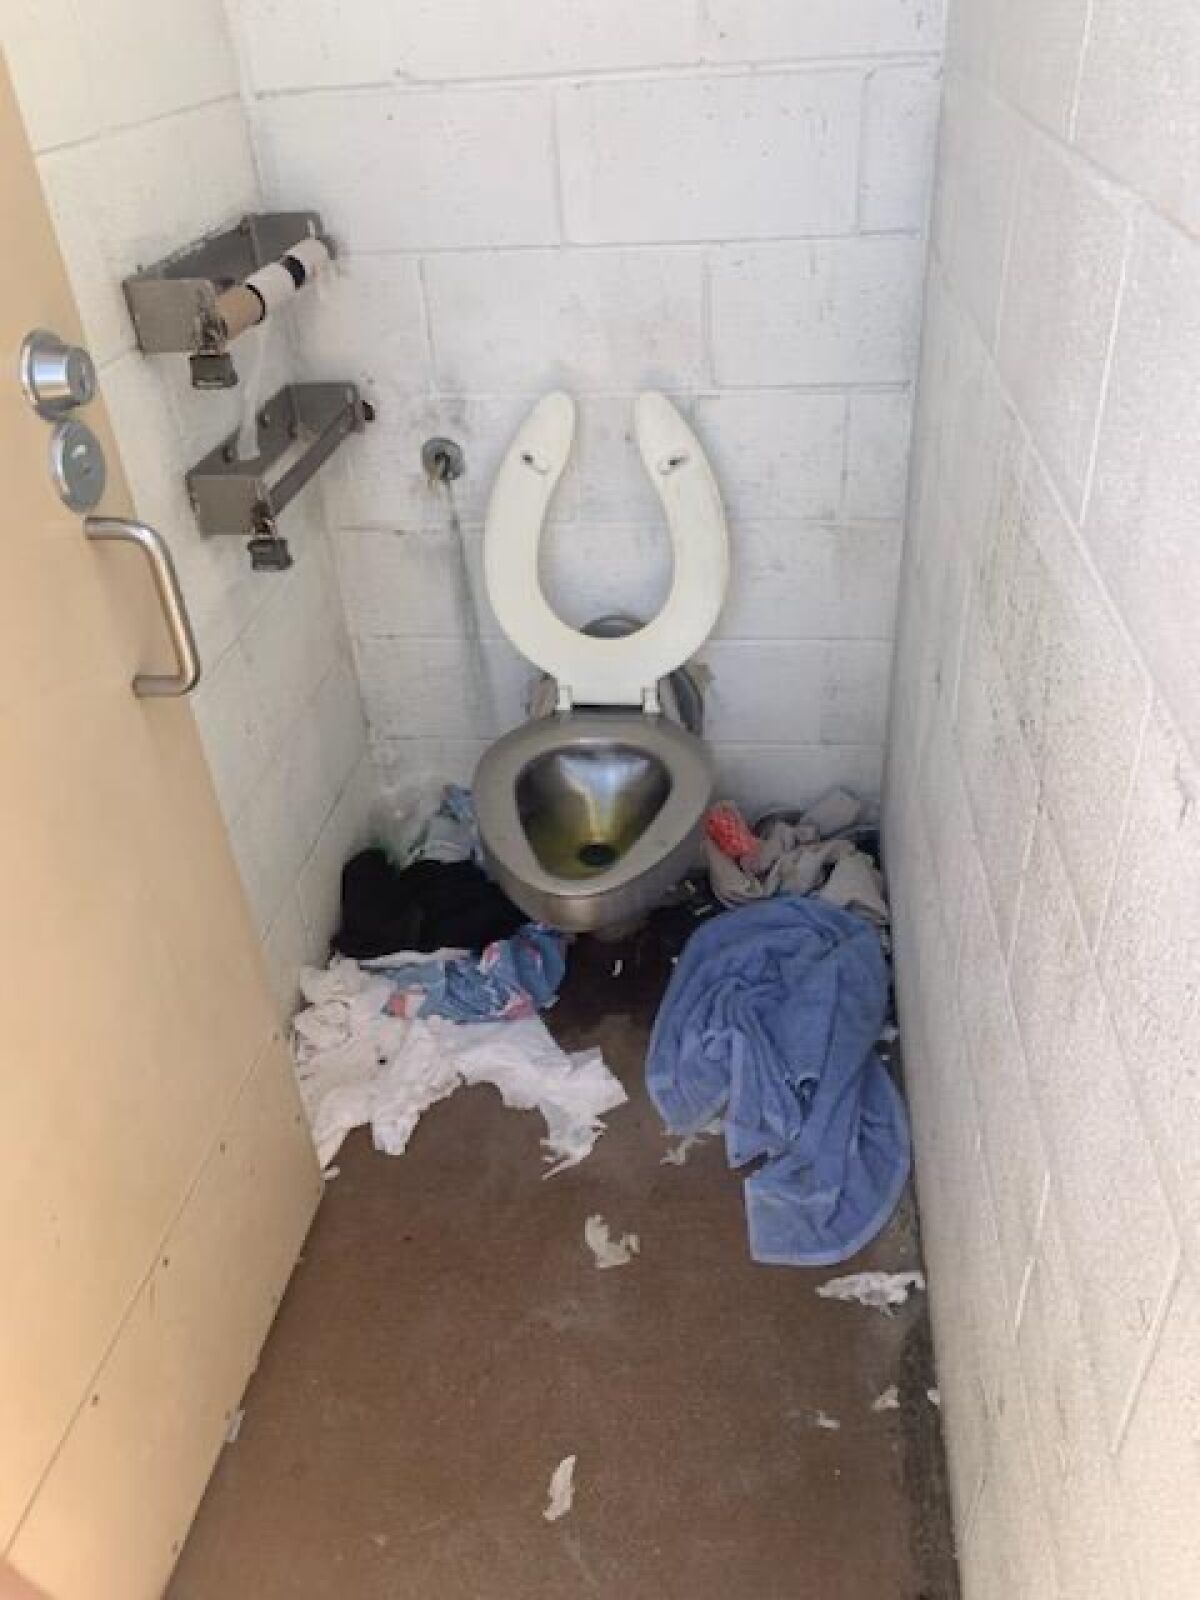 Resident Mike McCormack called this condition at the south restroom facility at La Jolla Shores' Kellogg Park "nuts."